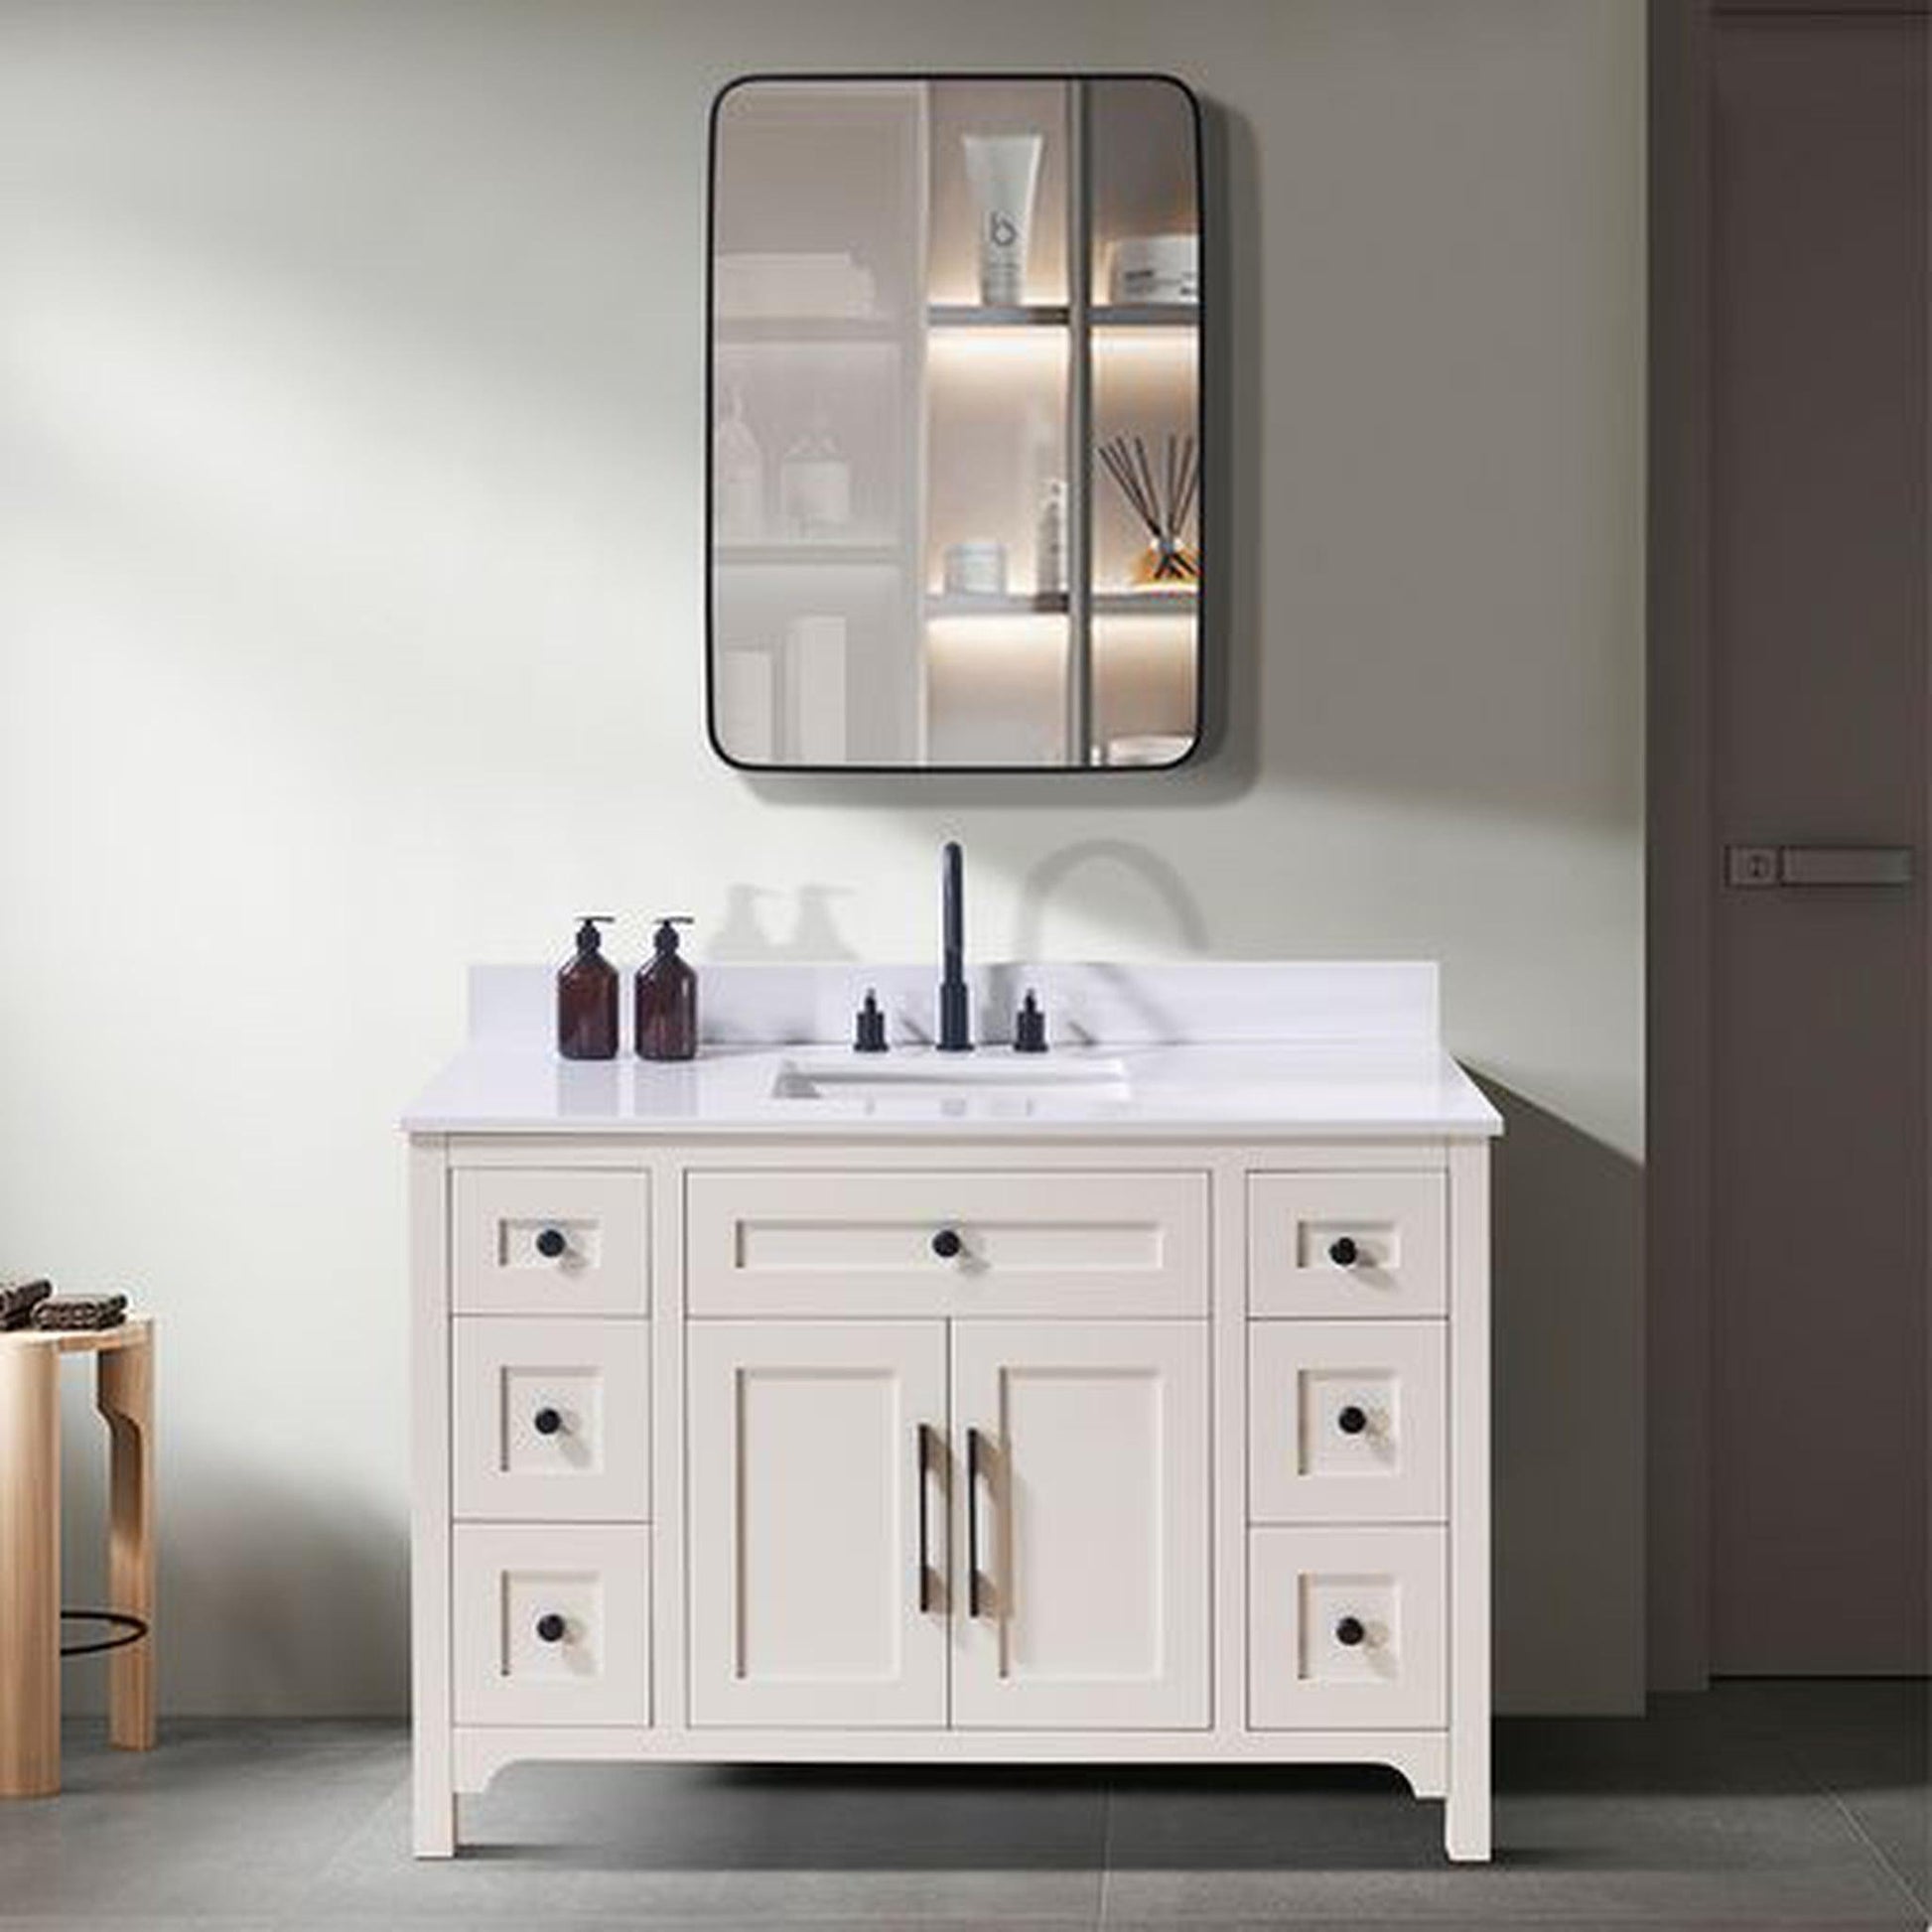 Altair Andalo 49" x 22" Snow White Composite Stone Bathroom Vanity Top With White SInk